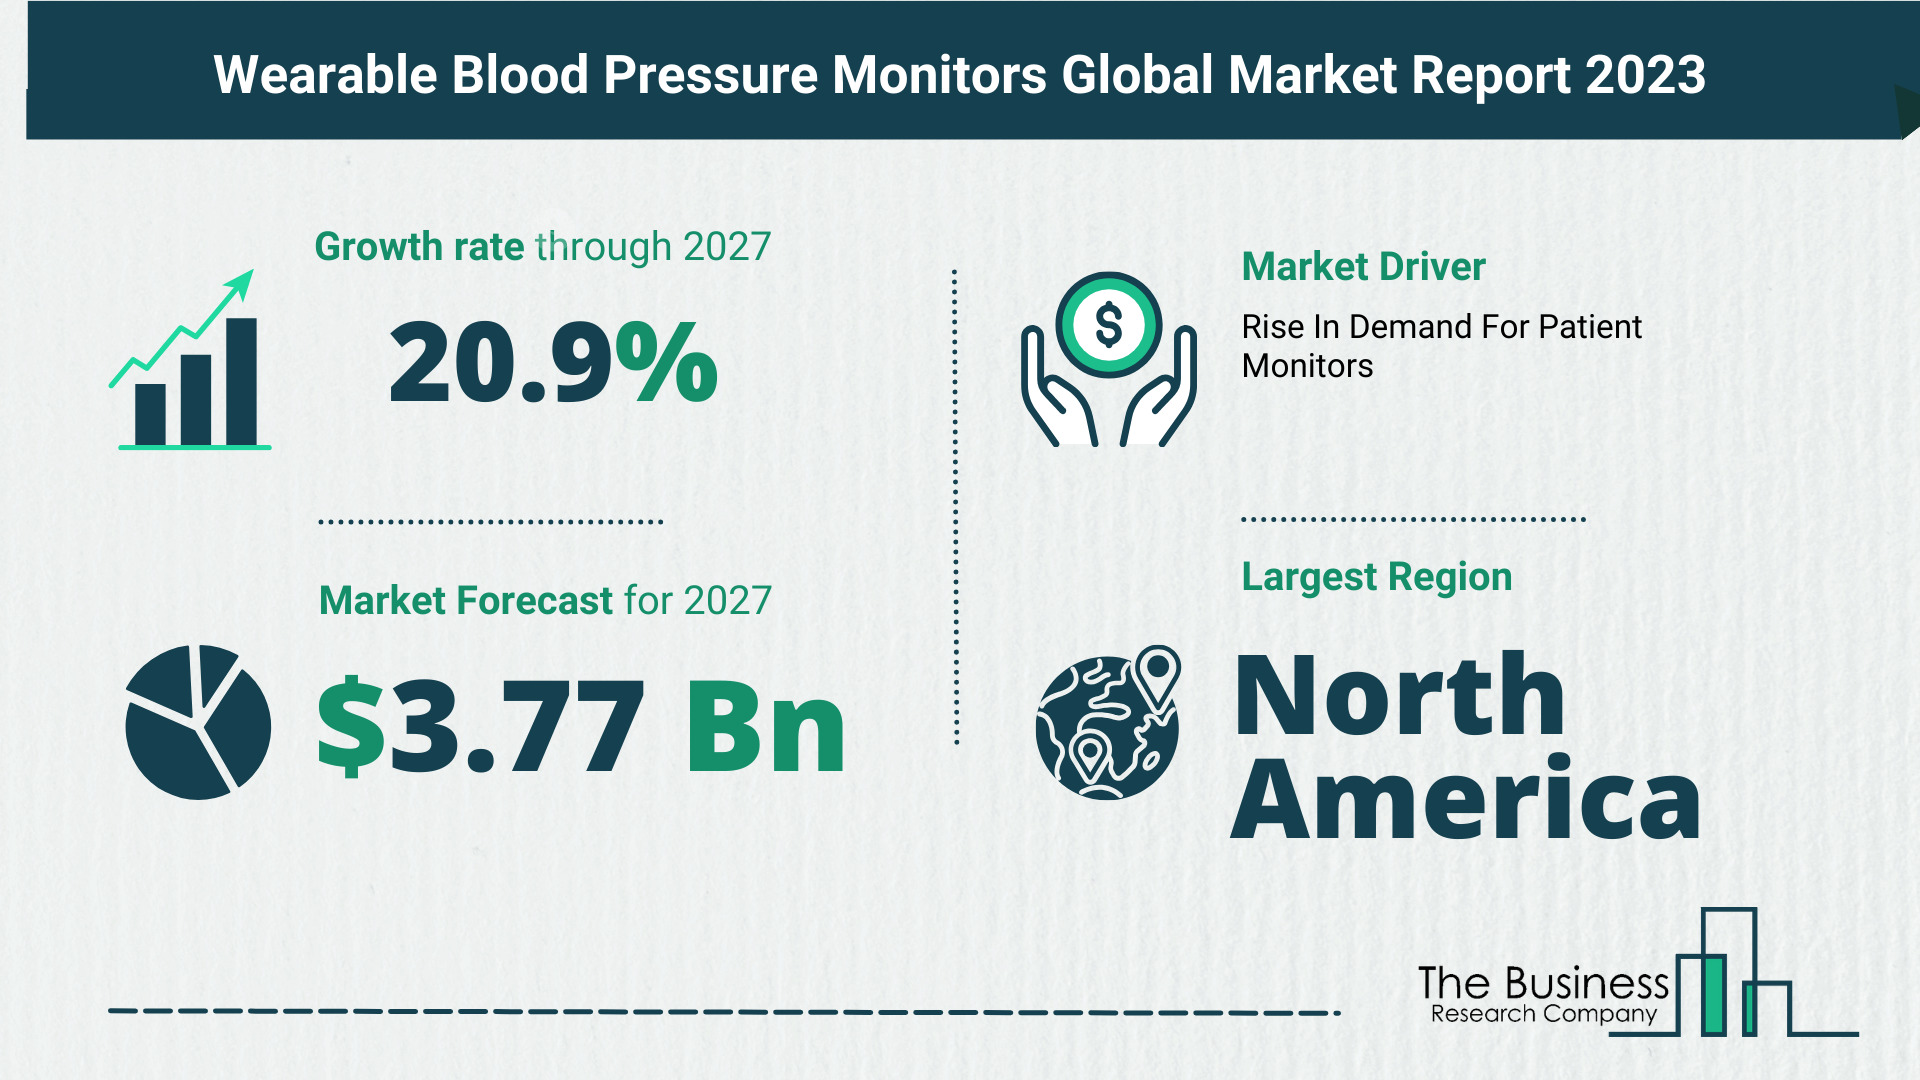 Understand How The Wearable Blood Pressure Monitors Market Is Poised To Grow Through 2023-2032